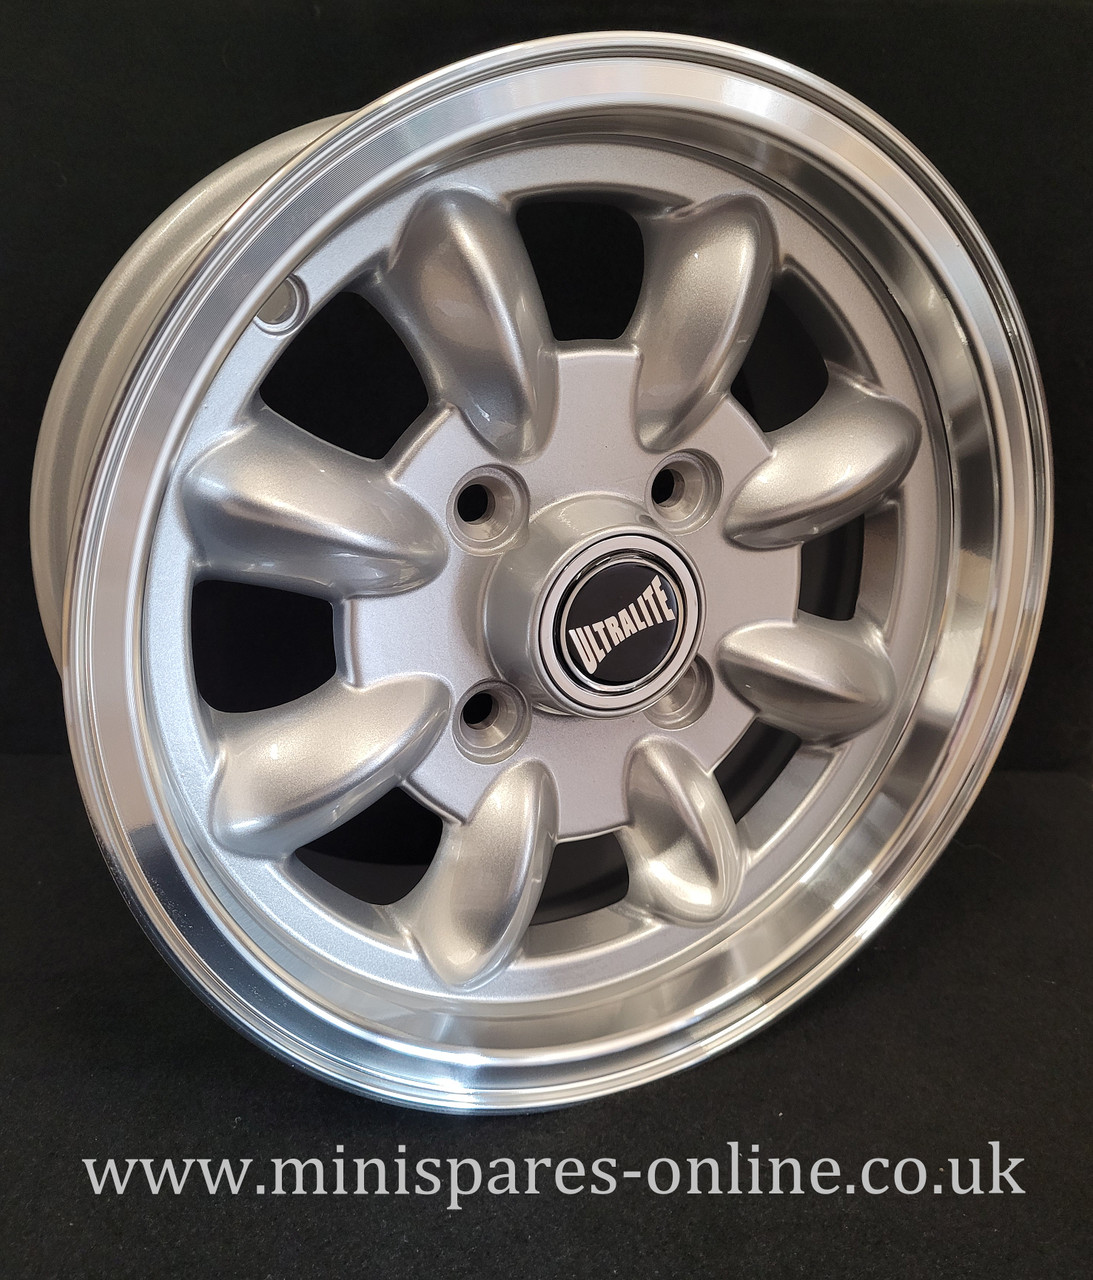 5.5x12 Silver (Polished Rim) Ultralite Alloy Wheel Rim or Package for Classic Mini